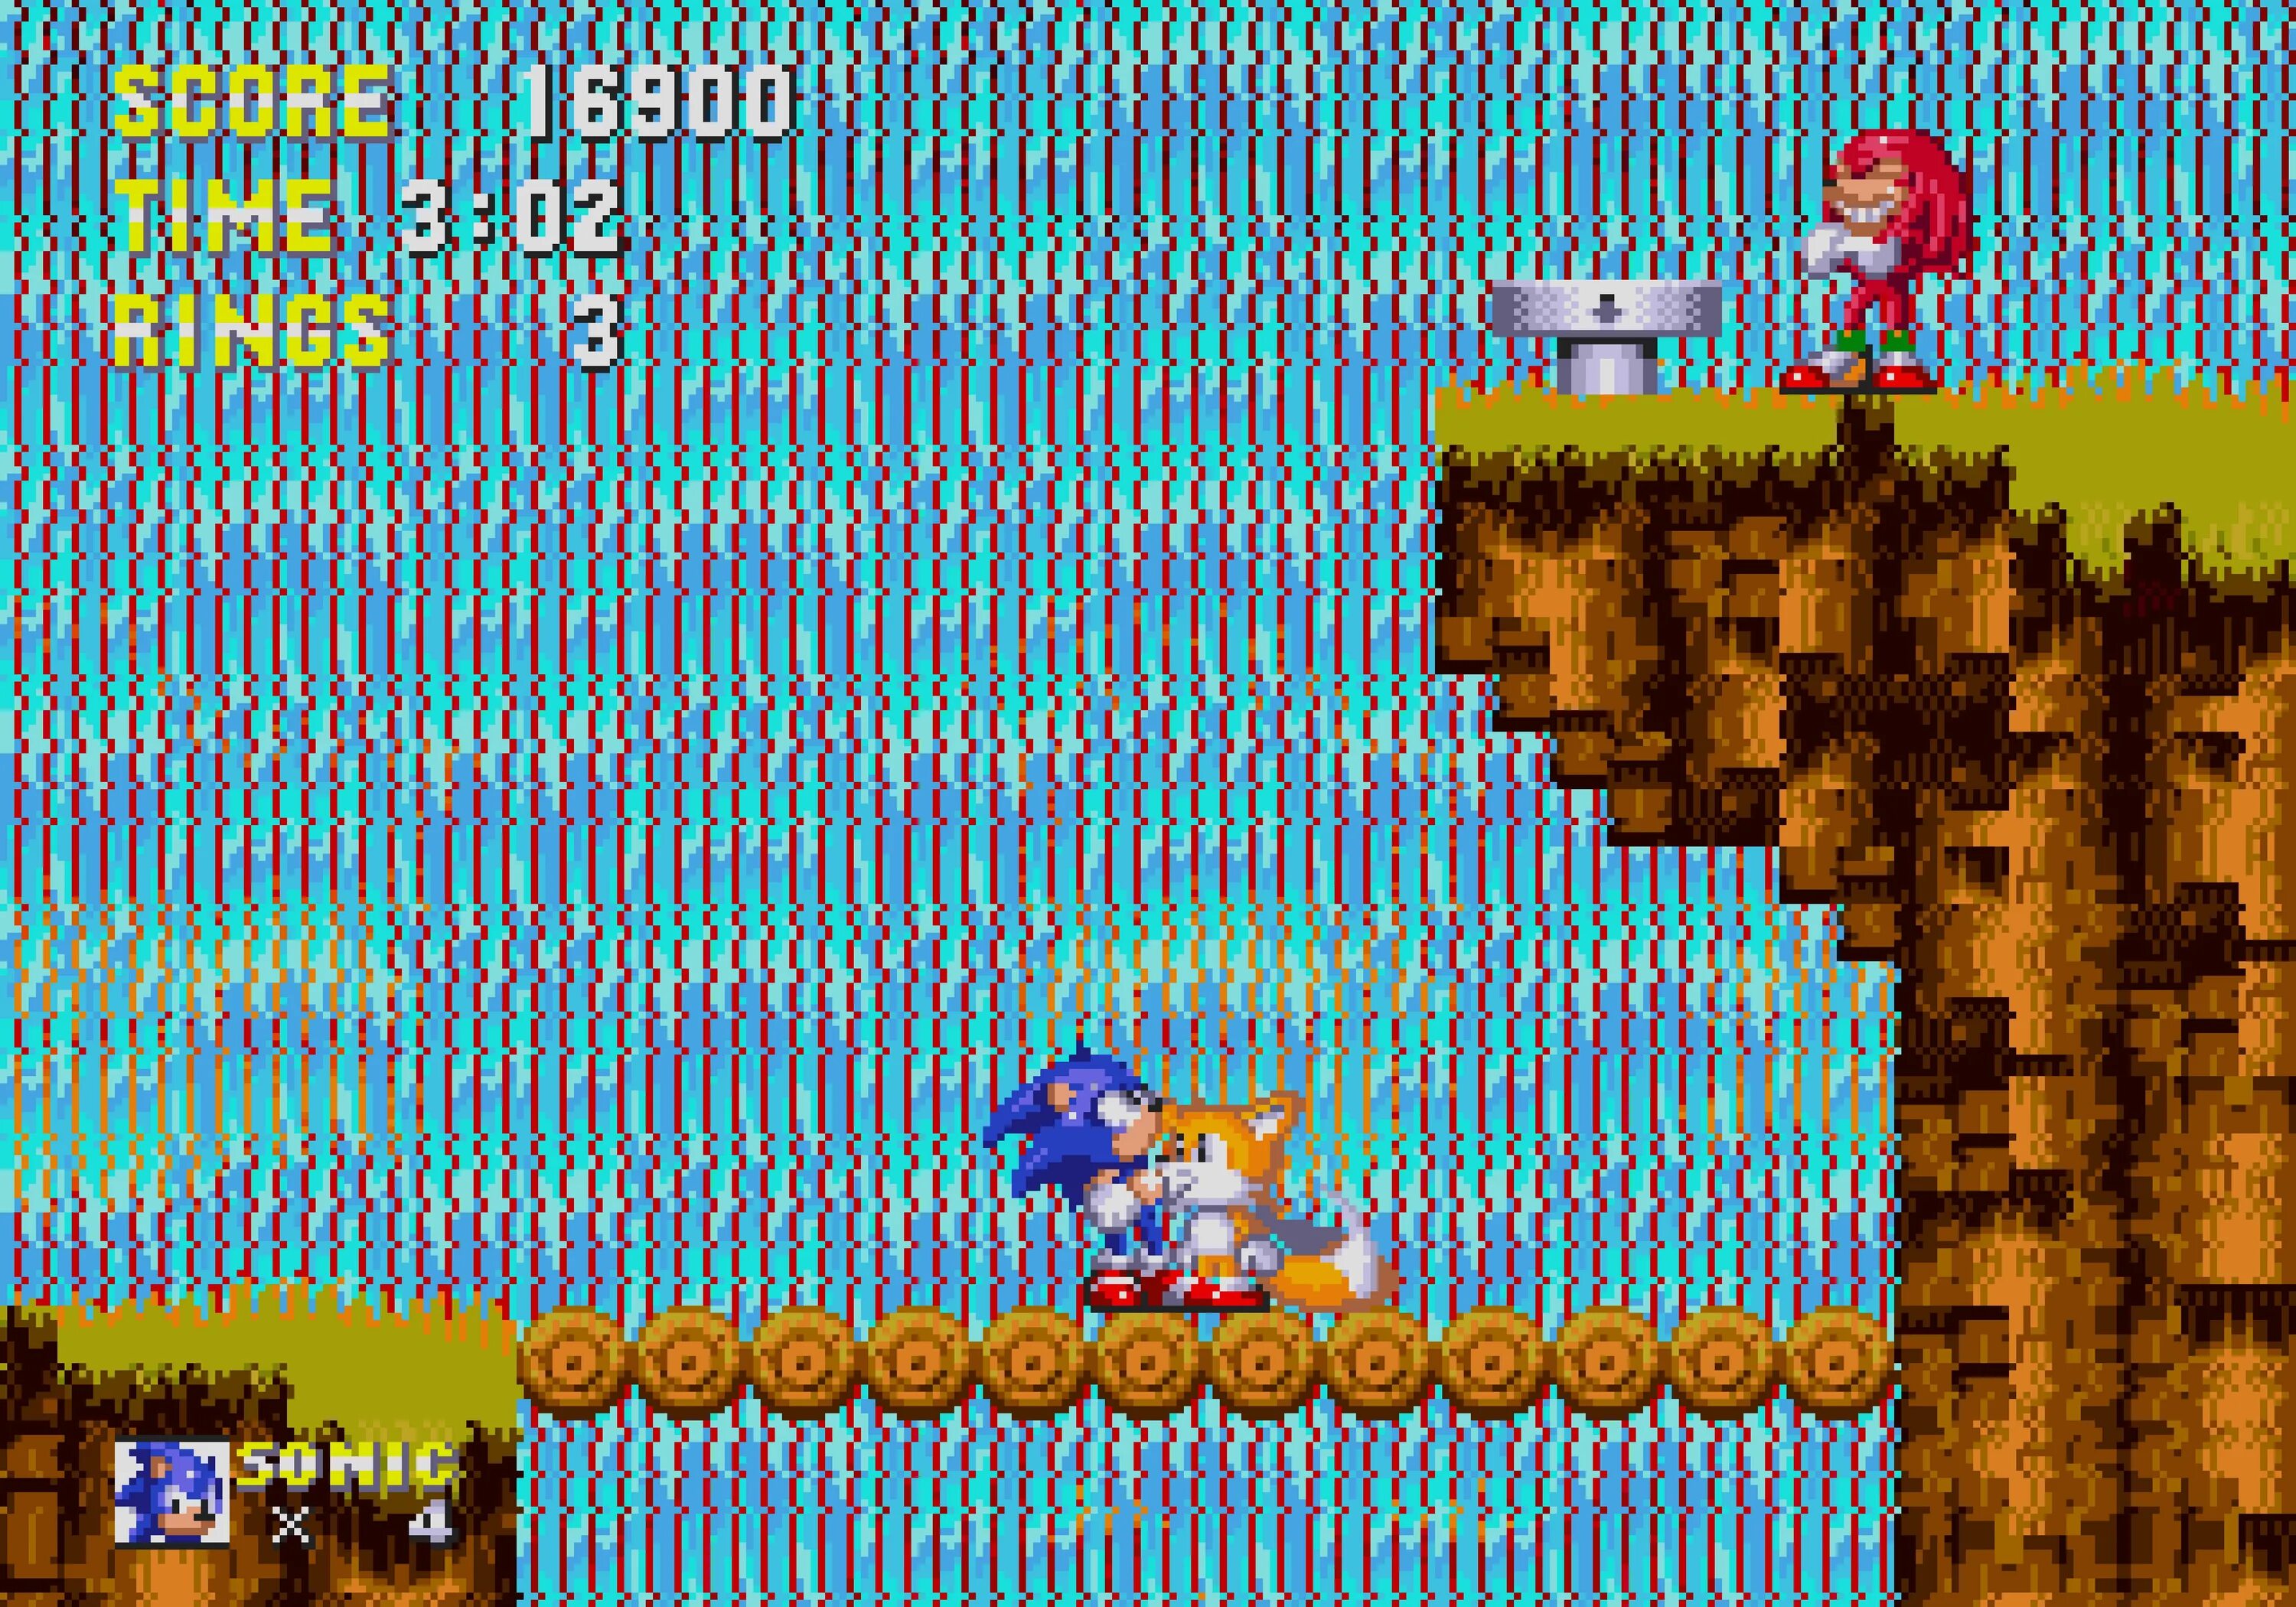 Игра Sonic the Hedgehog 3. Sonic 3 and Knuckles. Sonic the Hedgehog 3 and Knuckles. Sonic 3 и НАКЛЗ. Sonic 3 air knuckles